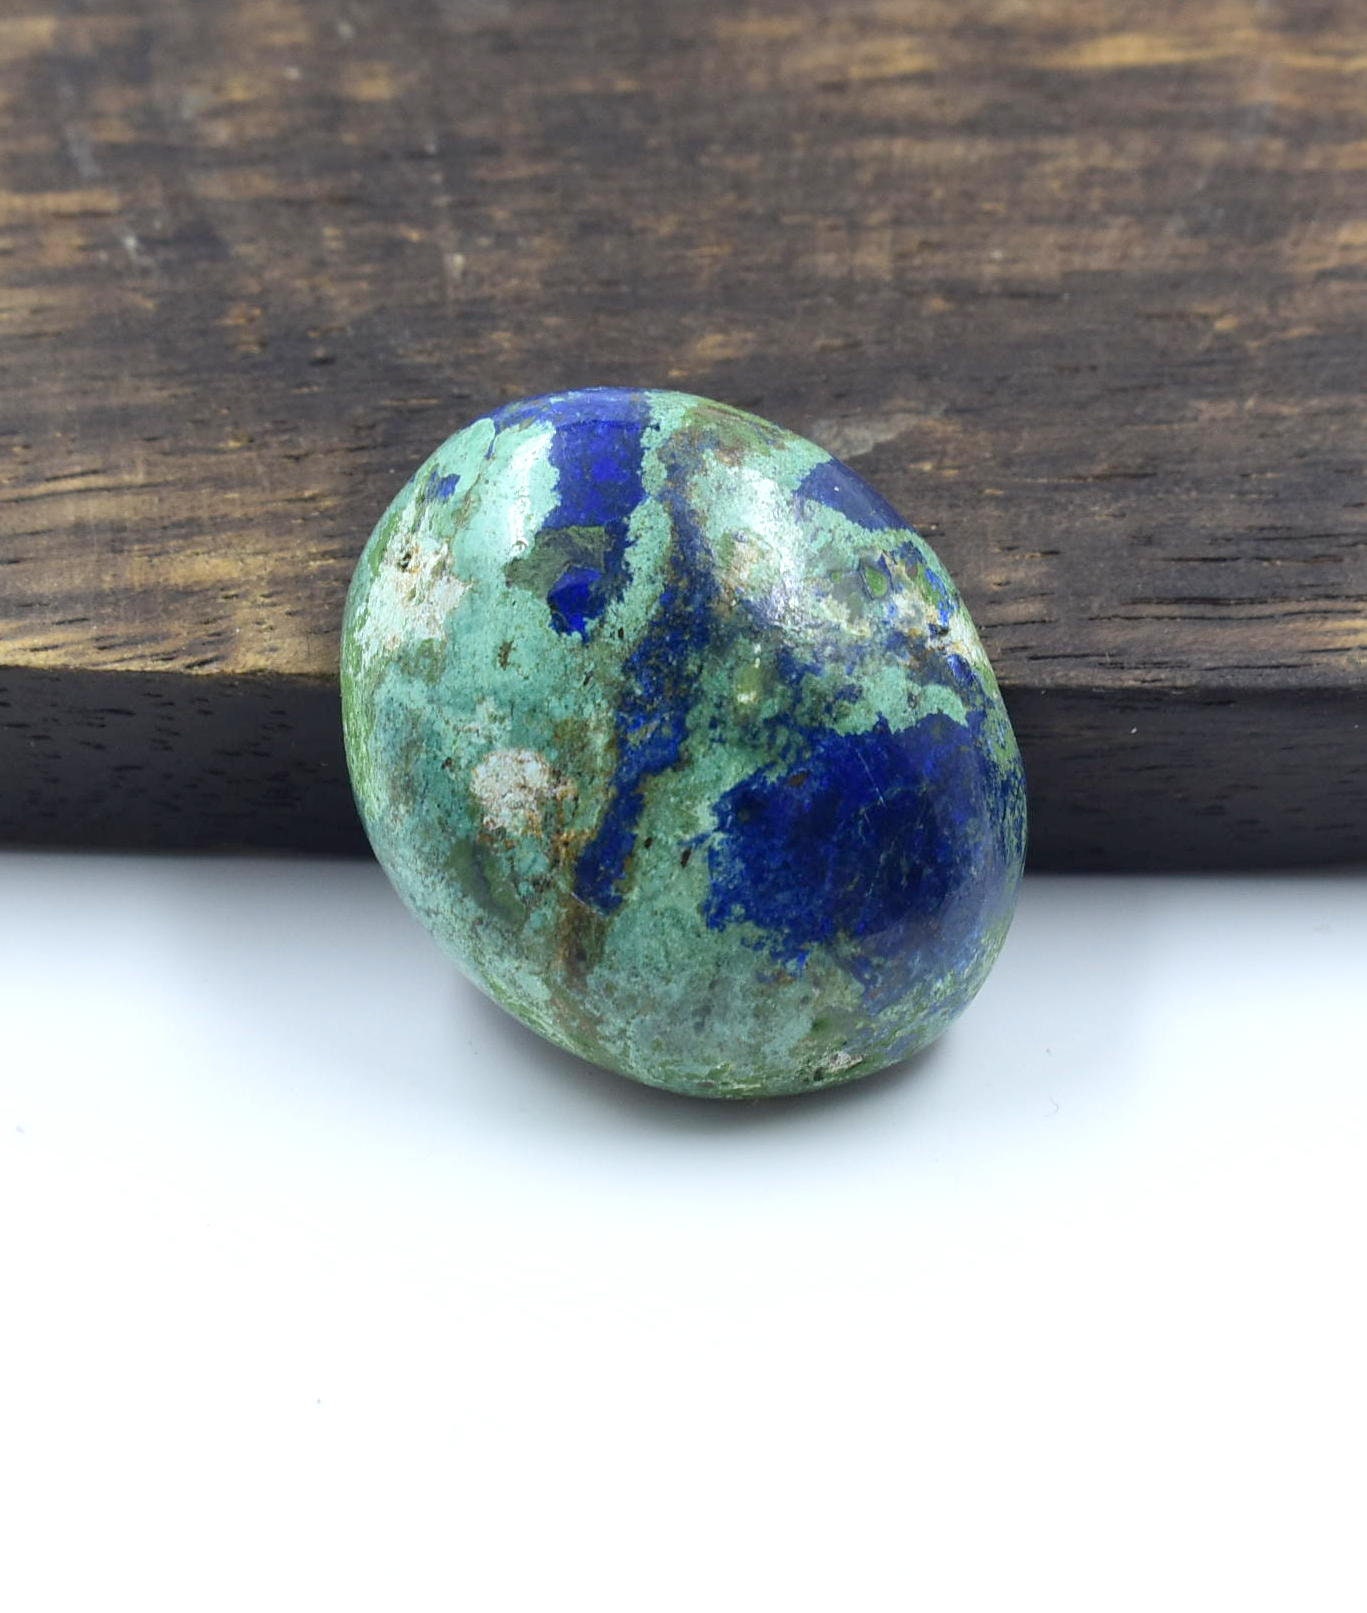 100% Natural Azurite Malachite Cabochon Good quality stone Beautiful Art Making for jewellery Ring 44.50 CARAT 26X22 MM | Save 33% - Rajasthan Living 14